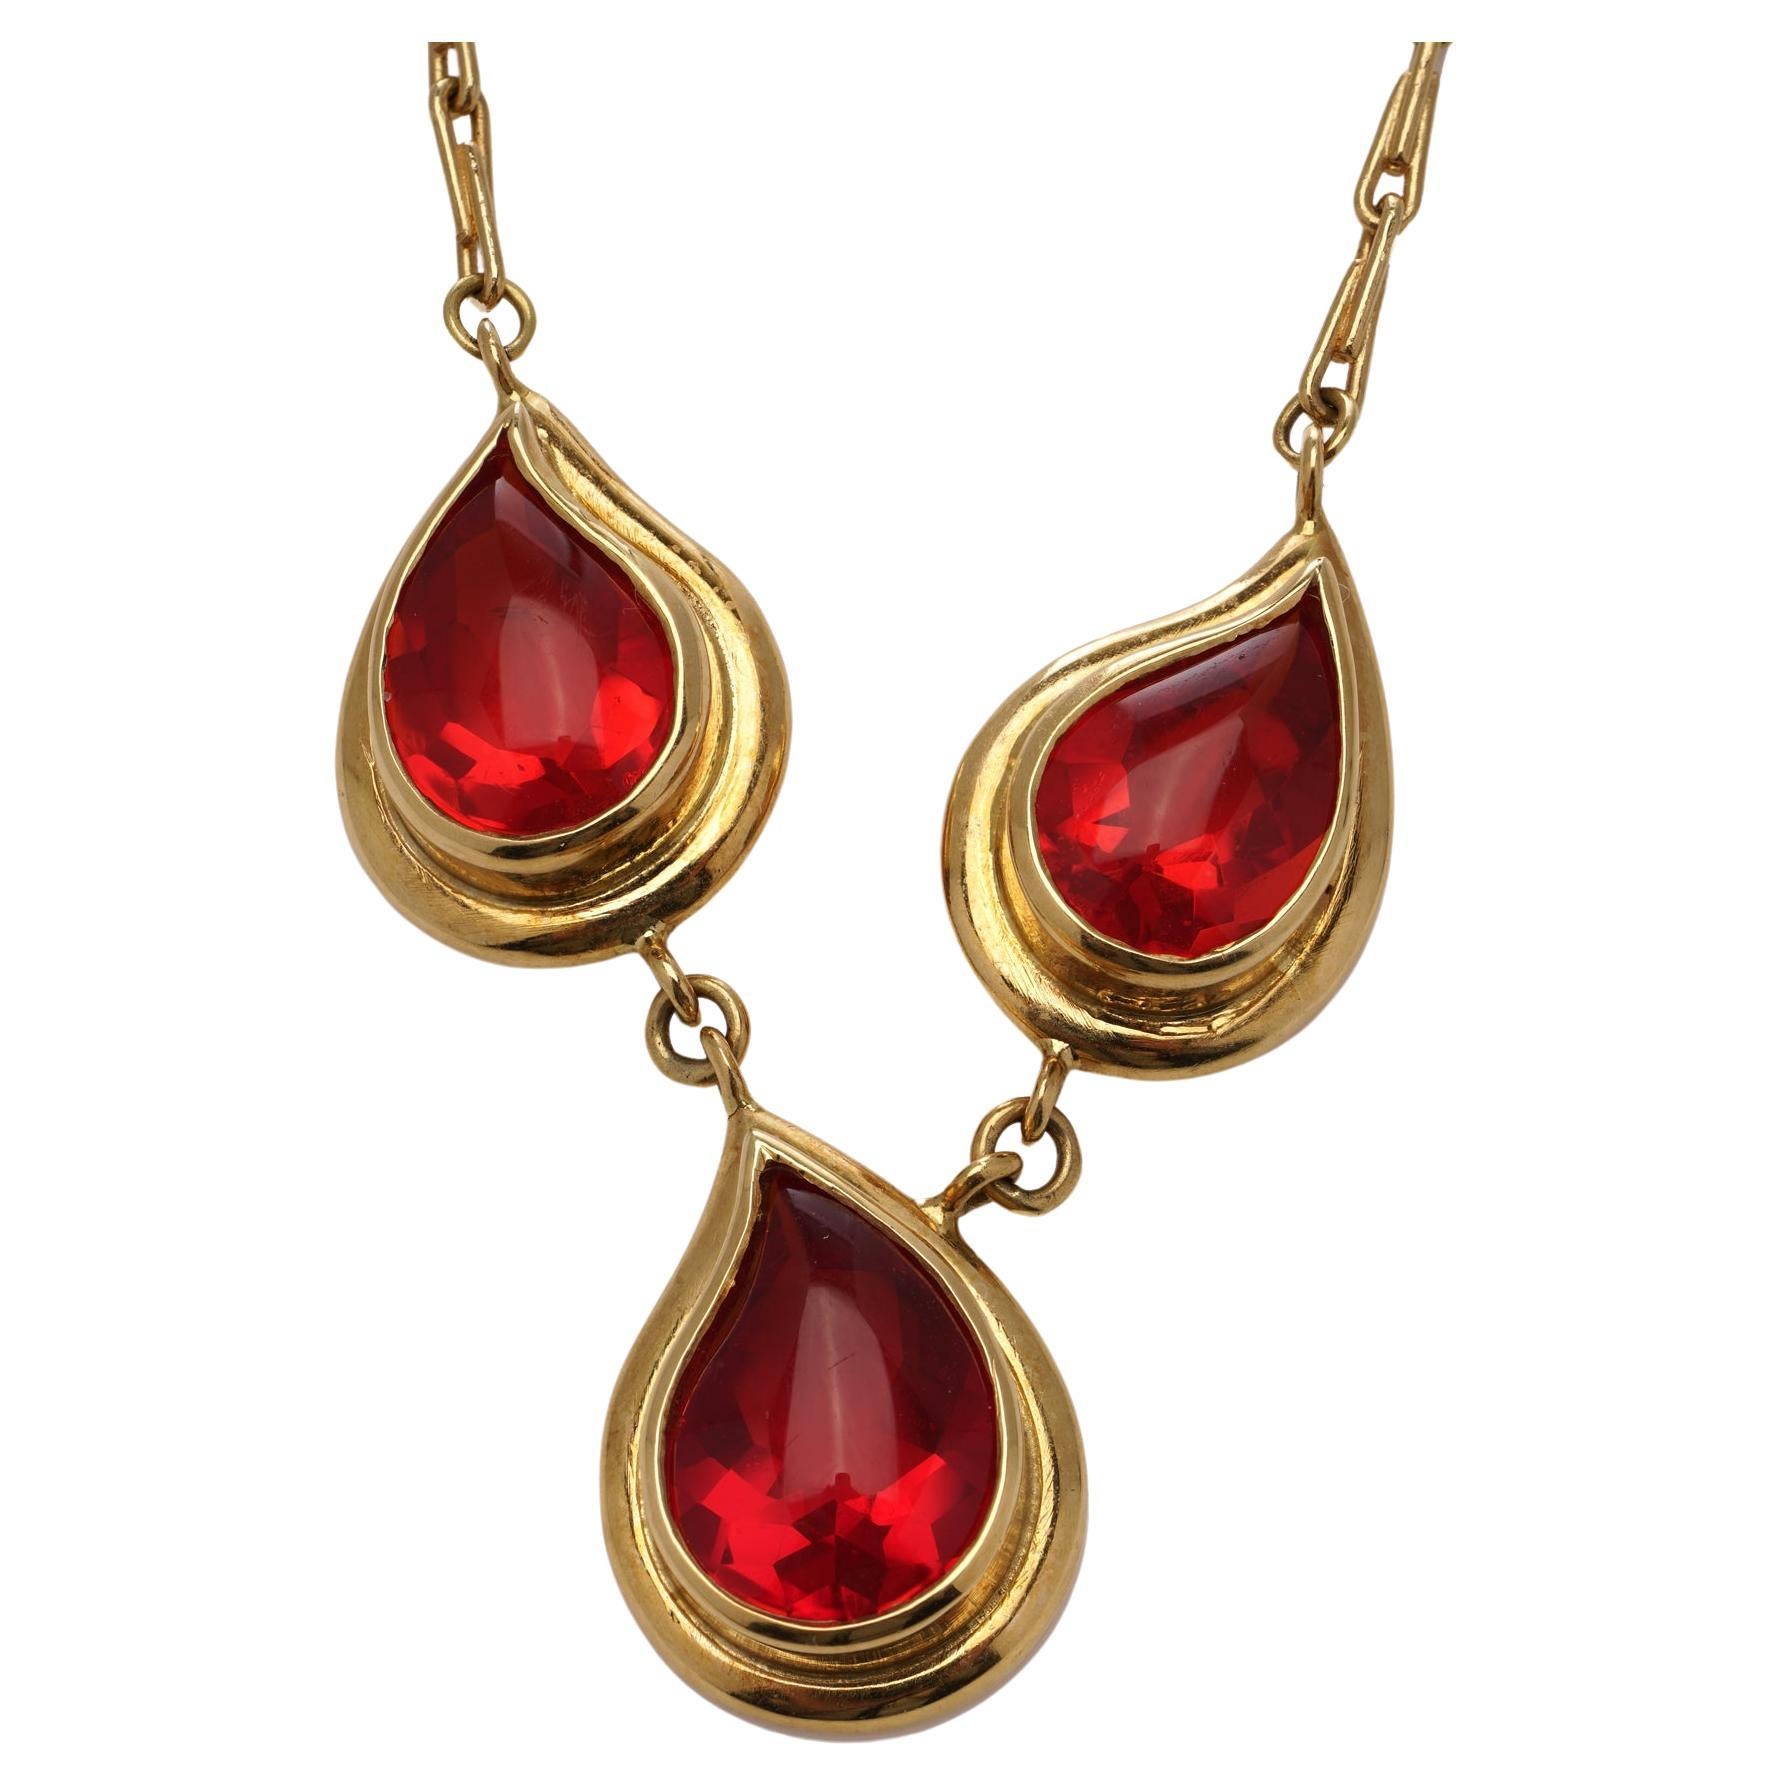 18kt gold pendant necklace featuring three tear-drop-shaped fire opals For Sale